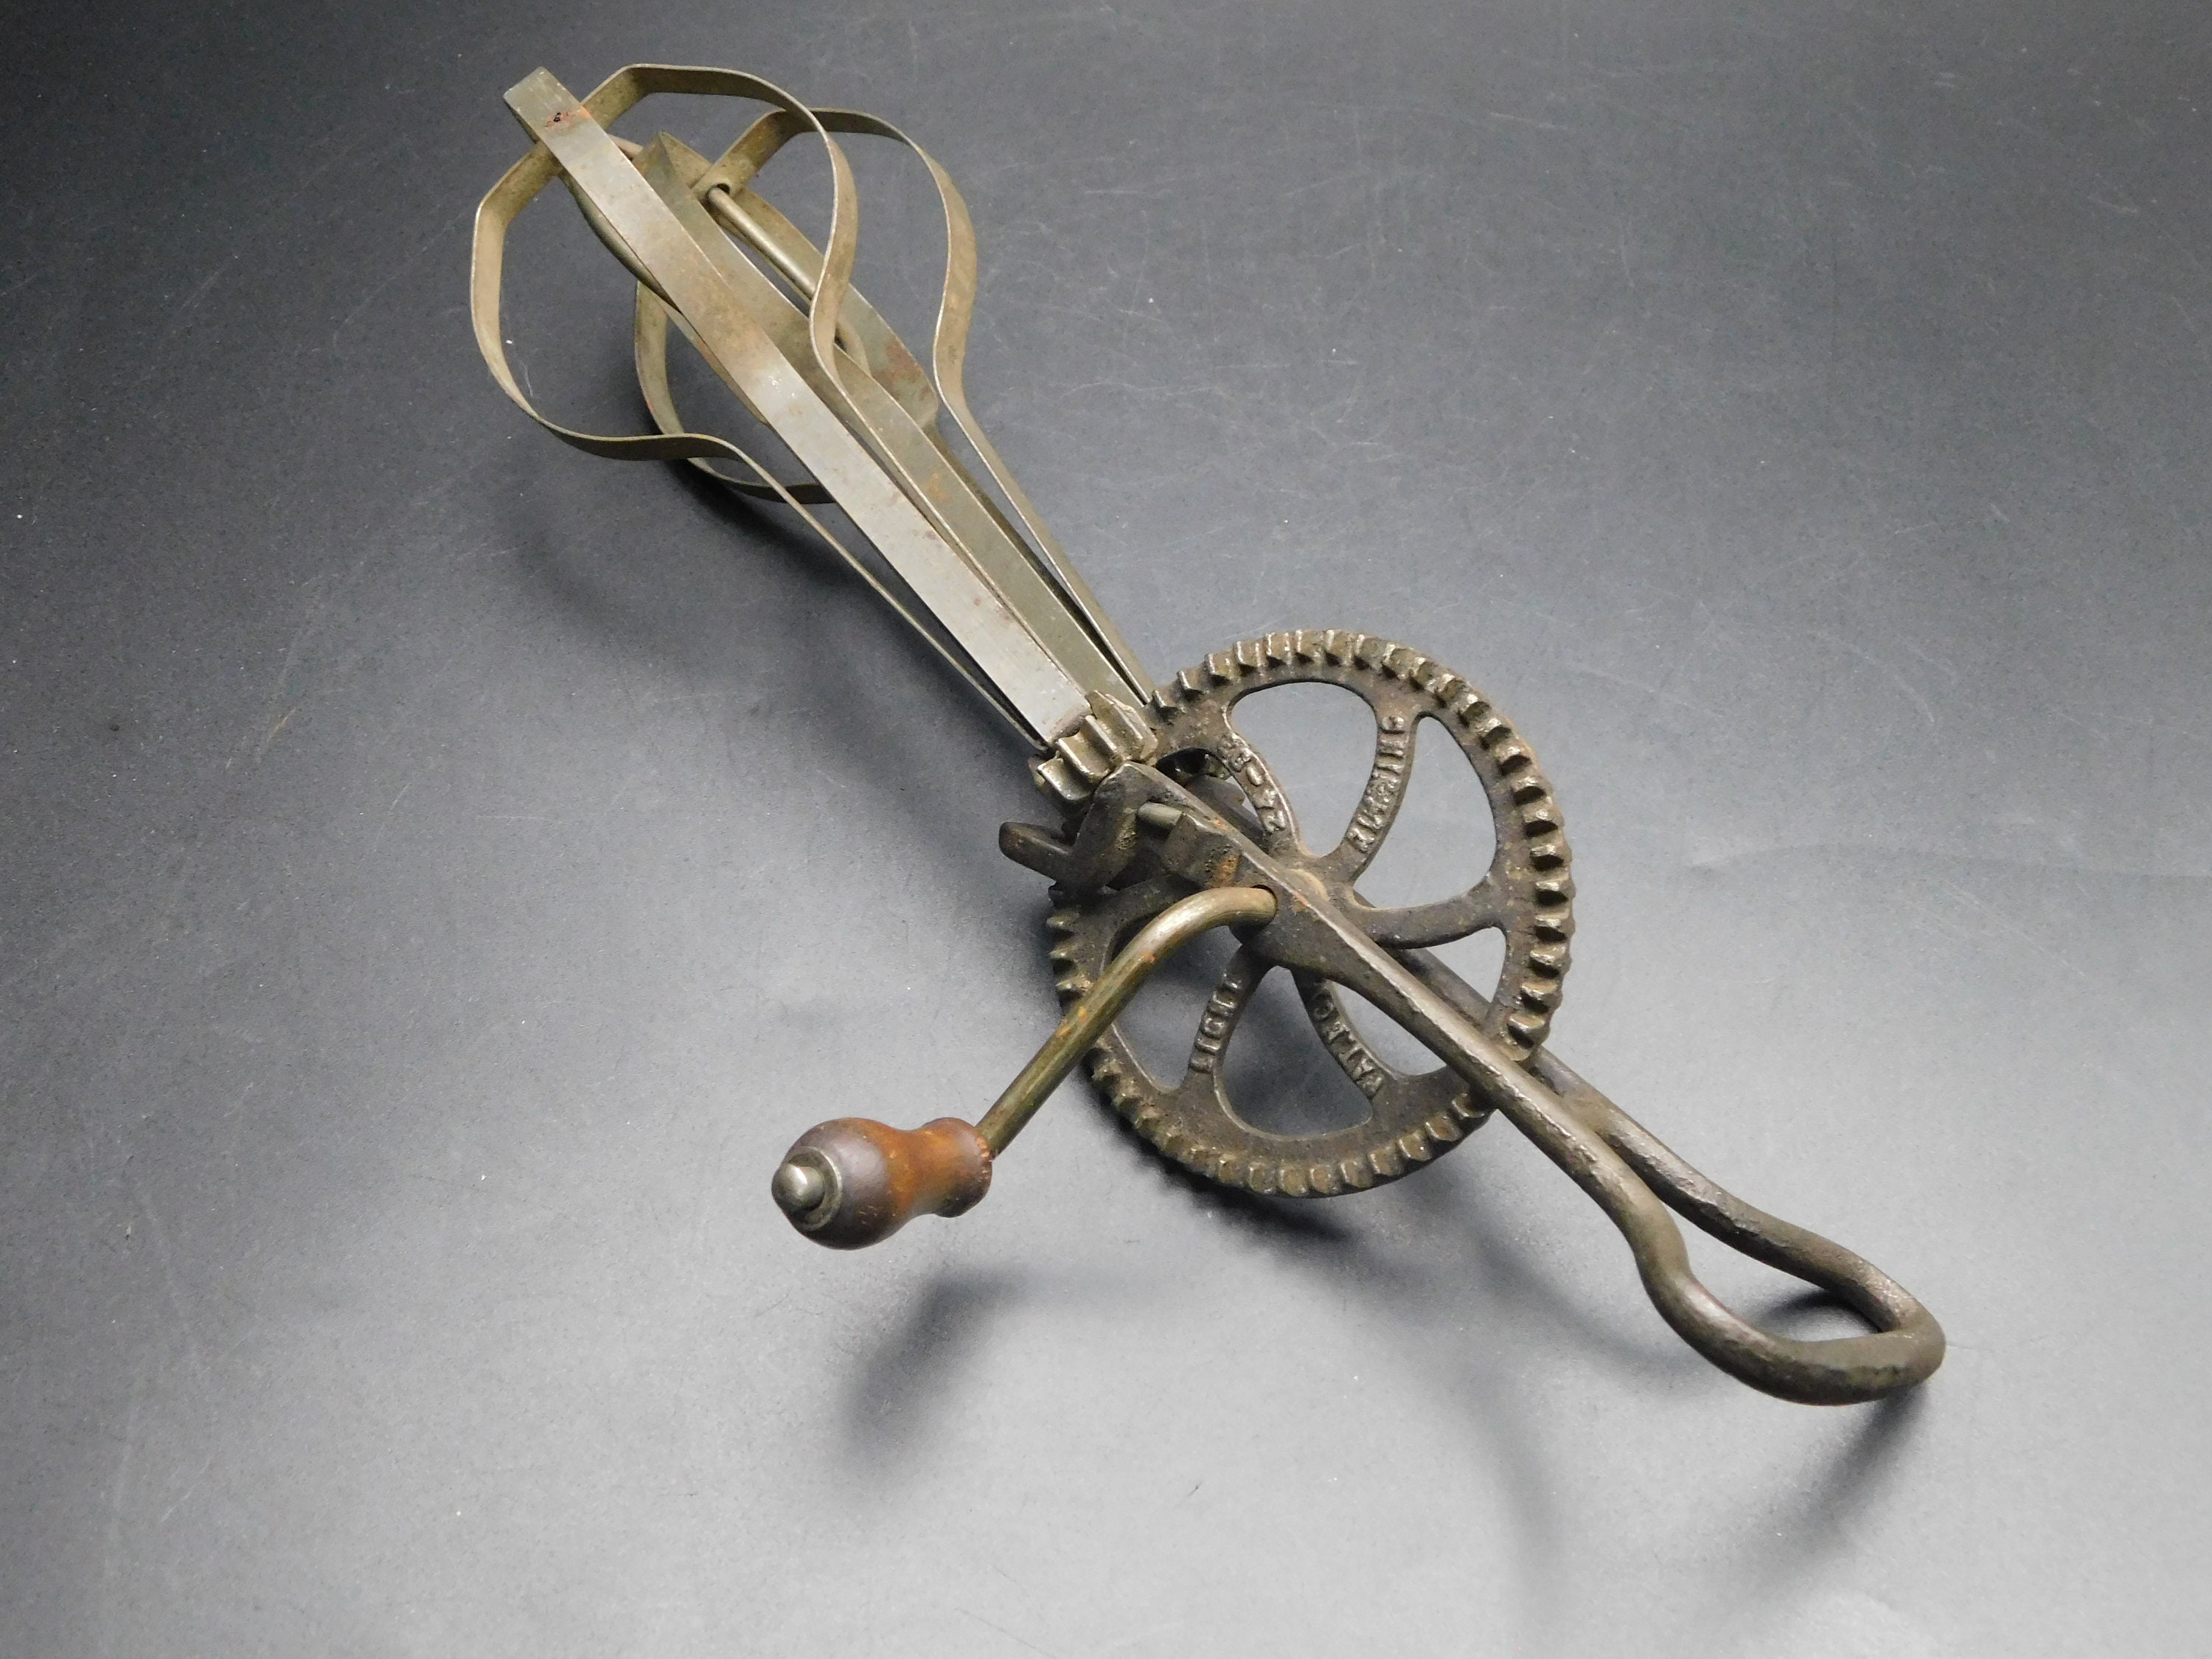 Vintage Type - Old Fashioned Amish Made Manual Hand Beater